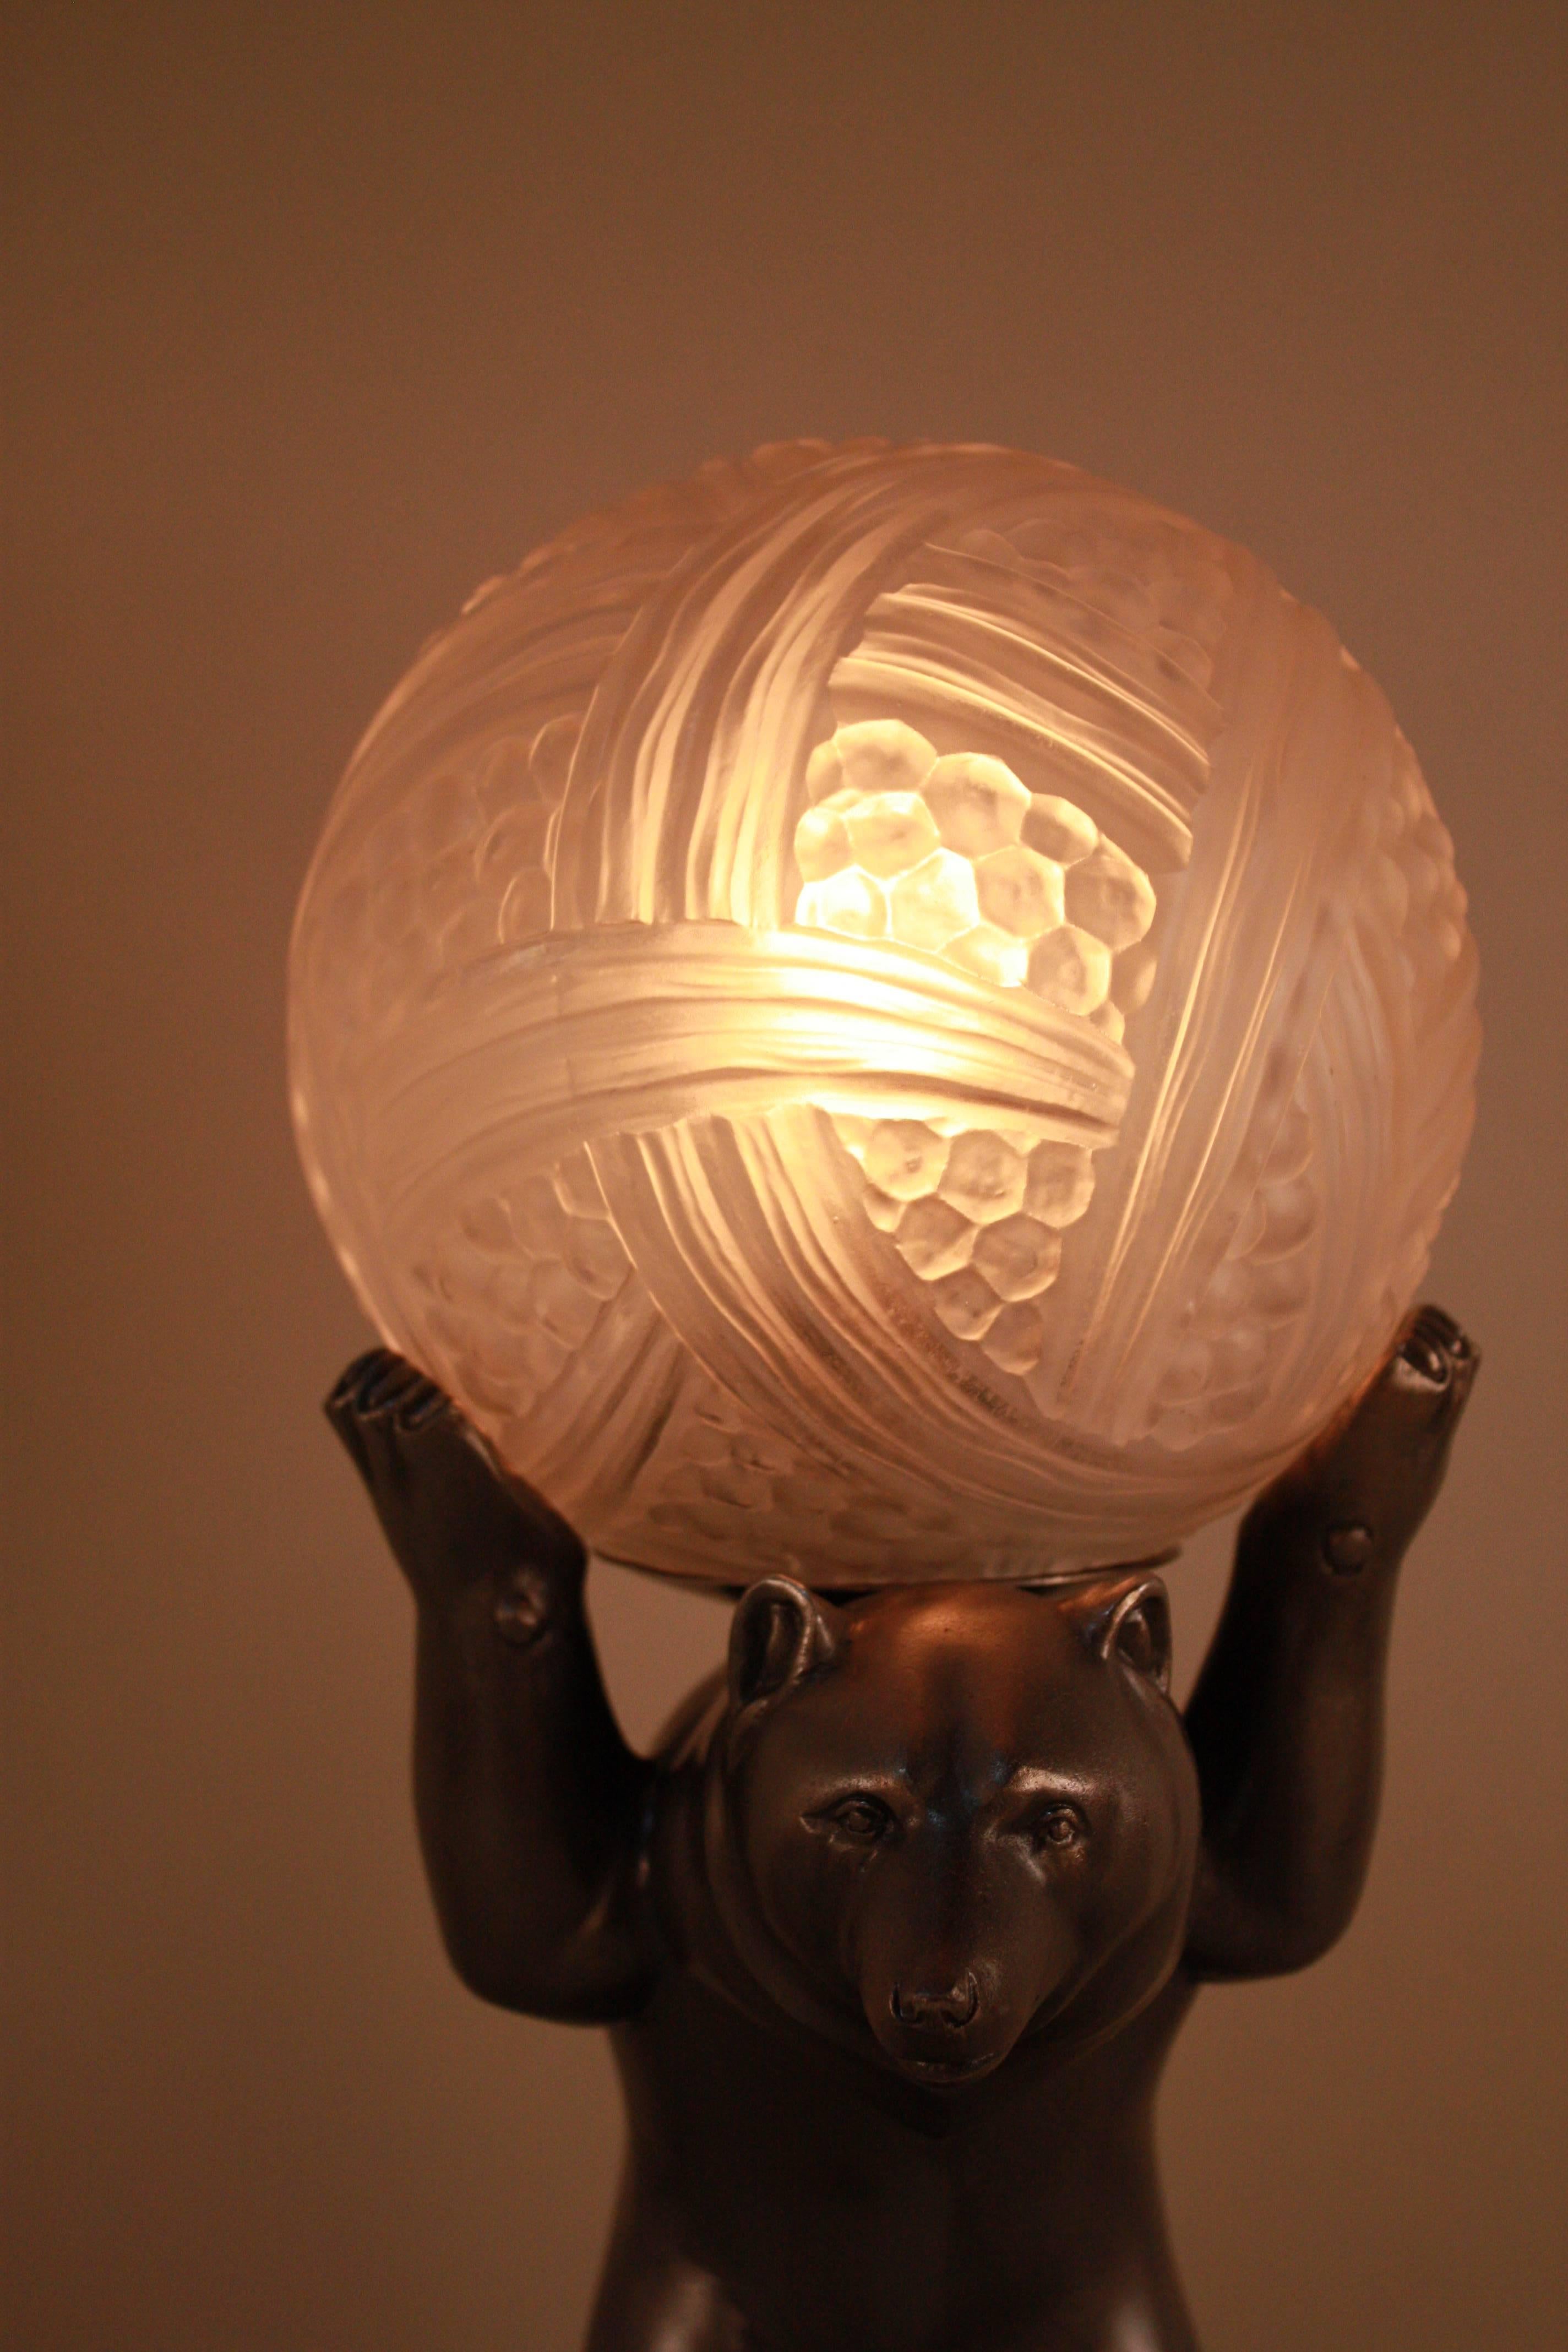 A stunning pewter bear base with beautiful geometric design glass shade by Hettier & Vincent.